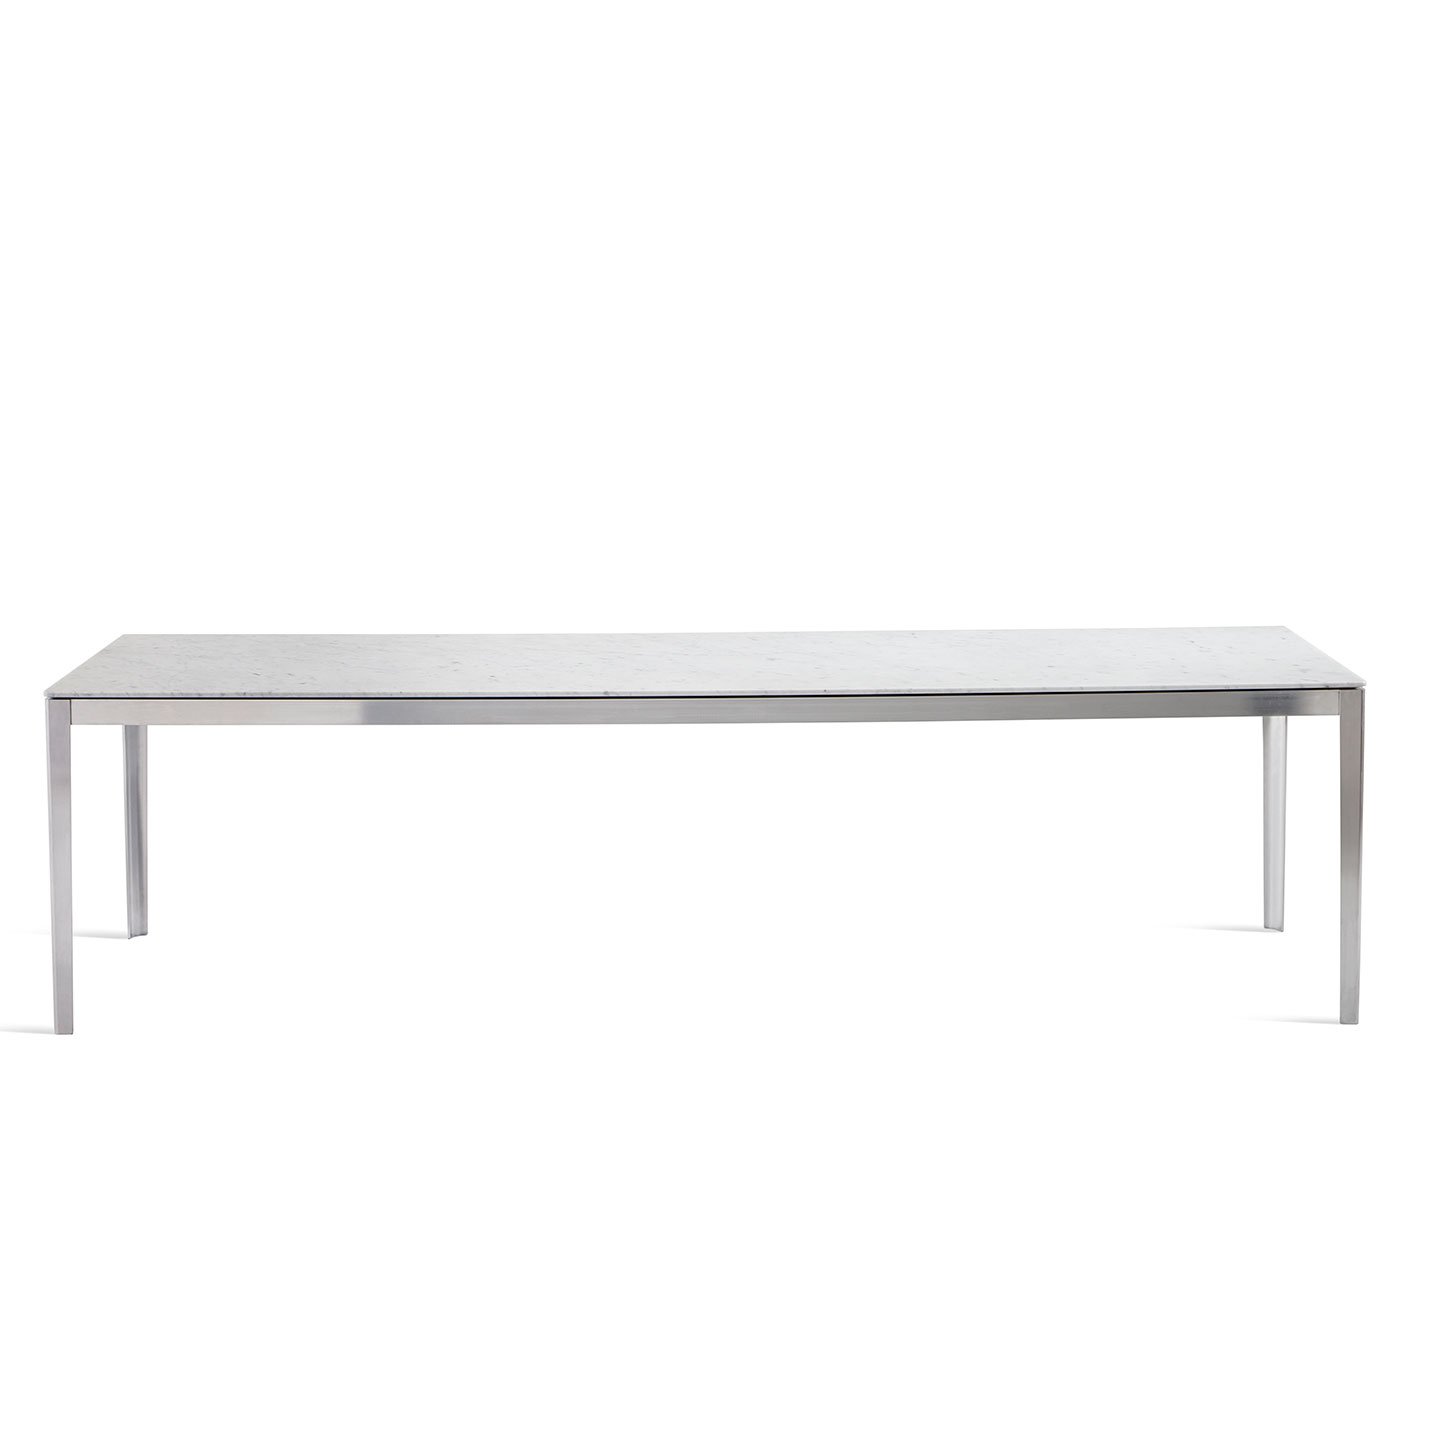 Haworth Cotone table 4 metal legs with solid surface top.